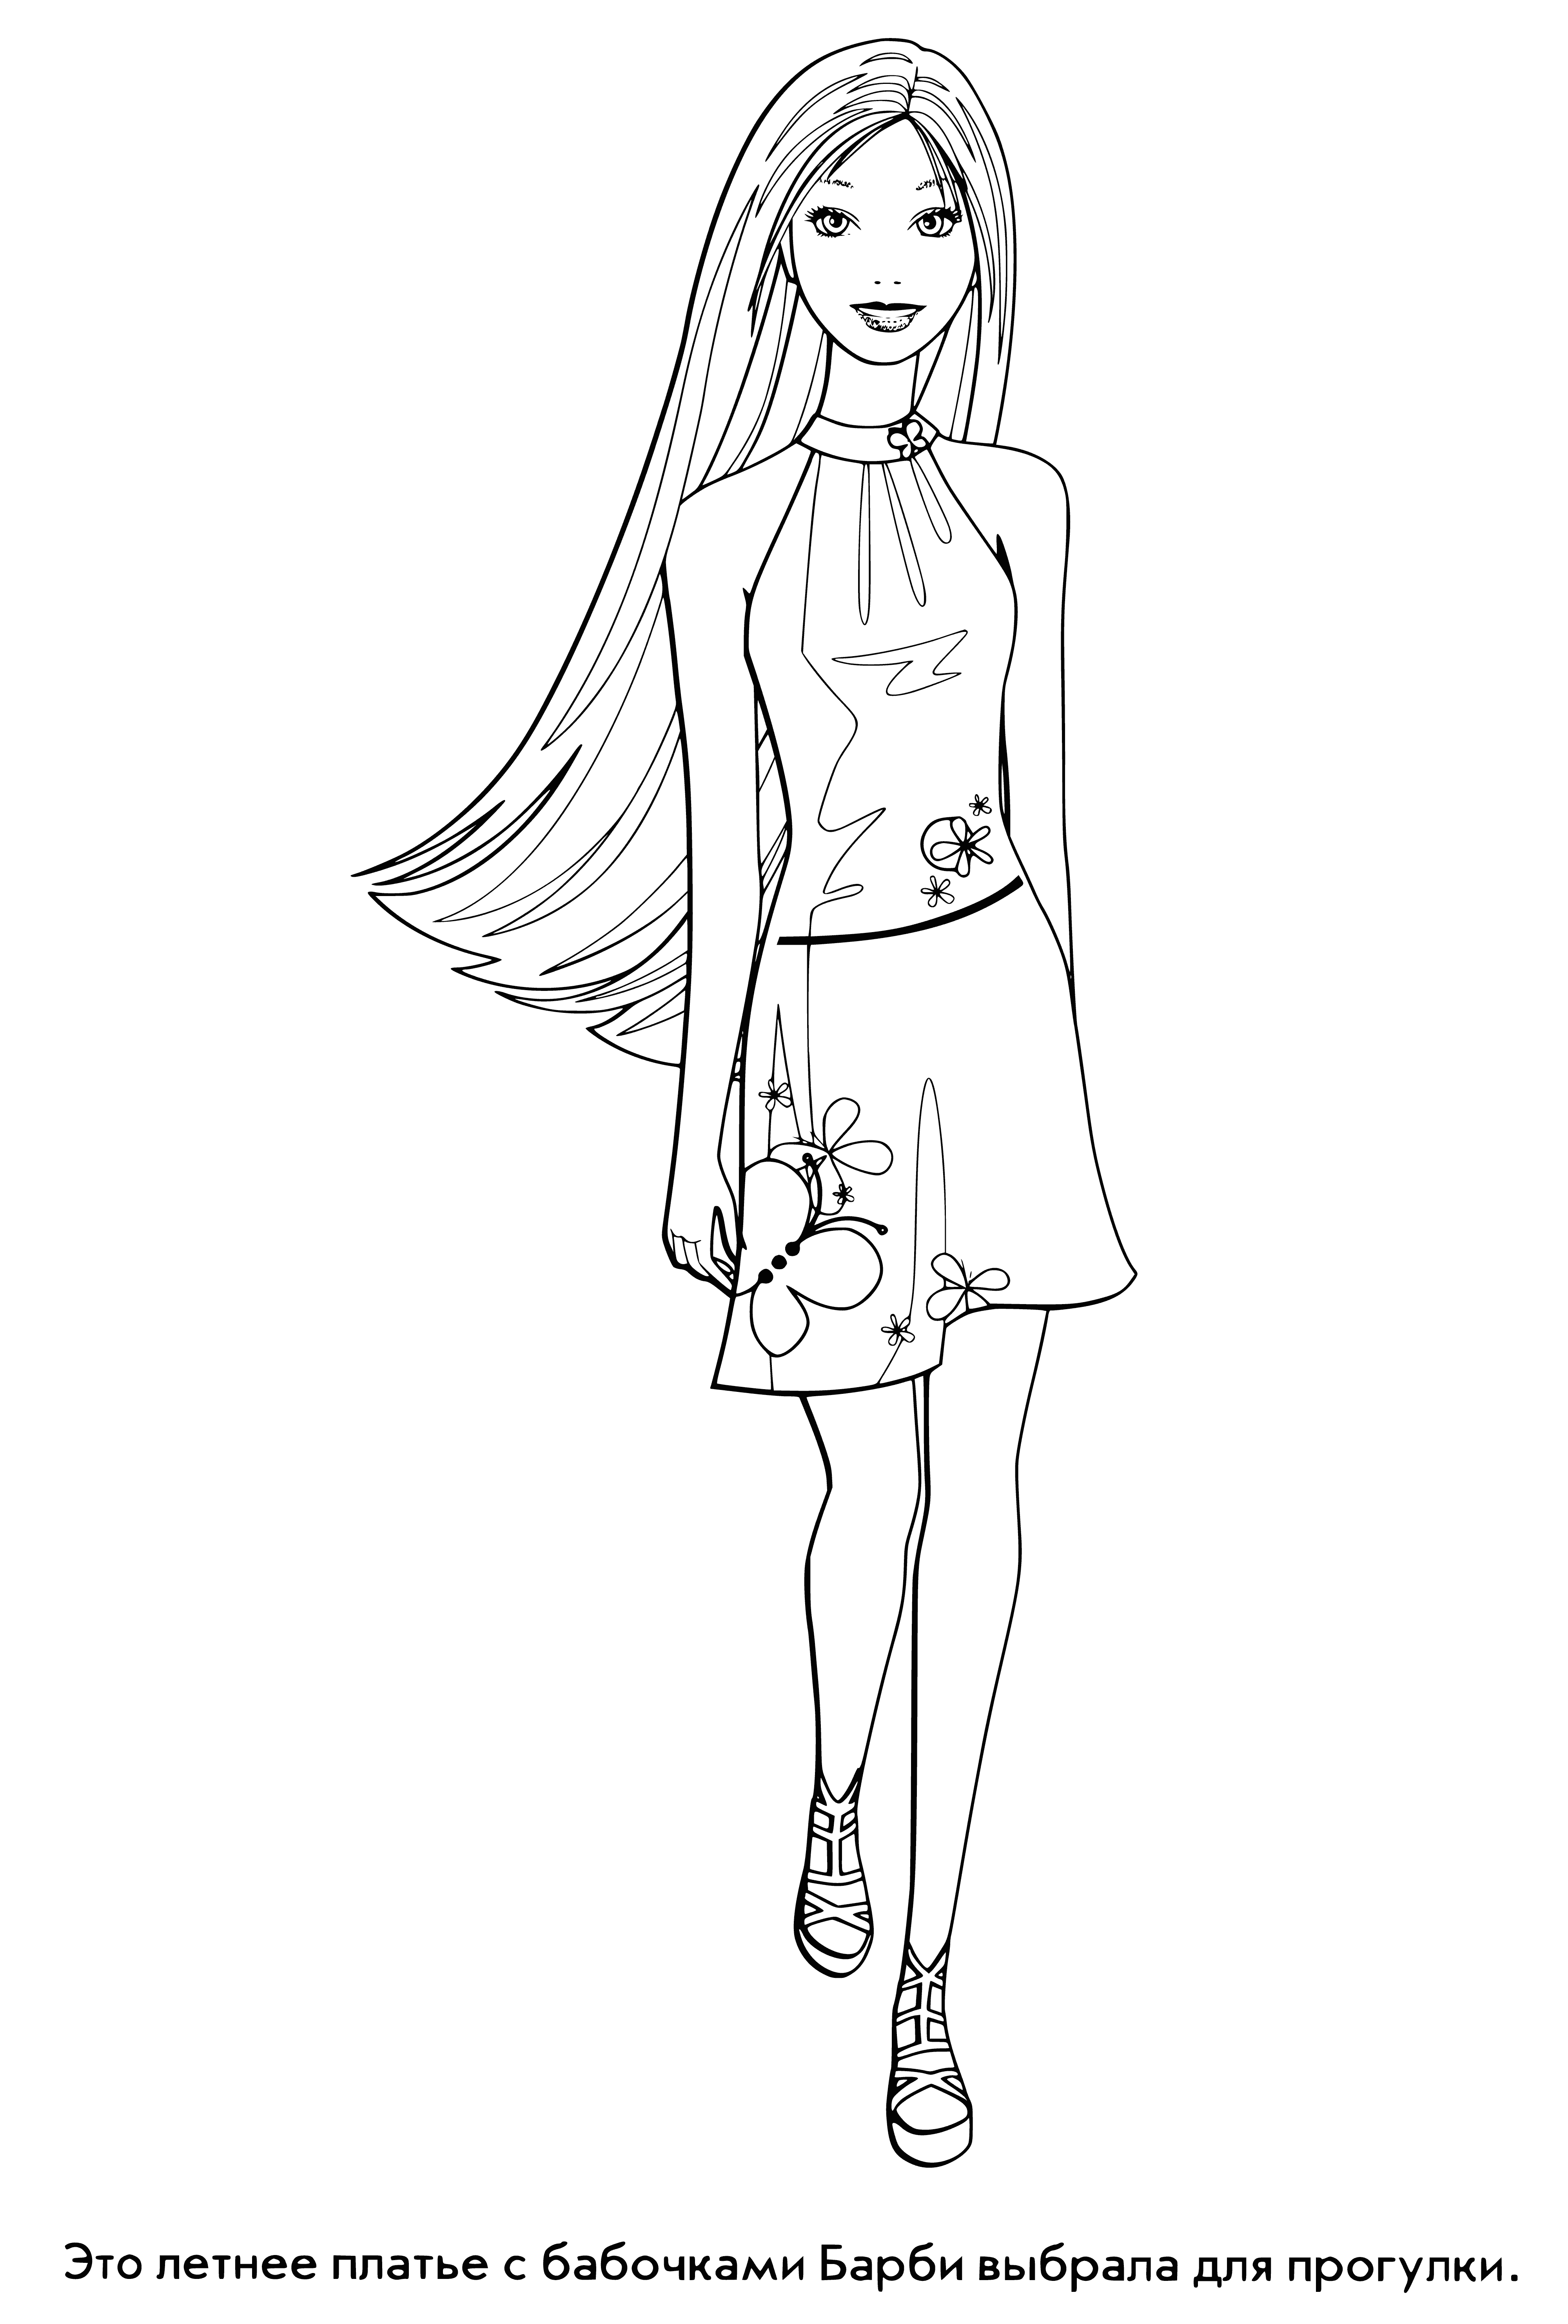 coloring page: Barbie has been a popular doll since 1959, with blonde hair, blue eyes, pink dress & purse. #Barbie